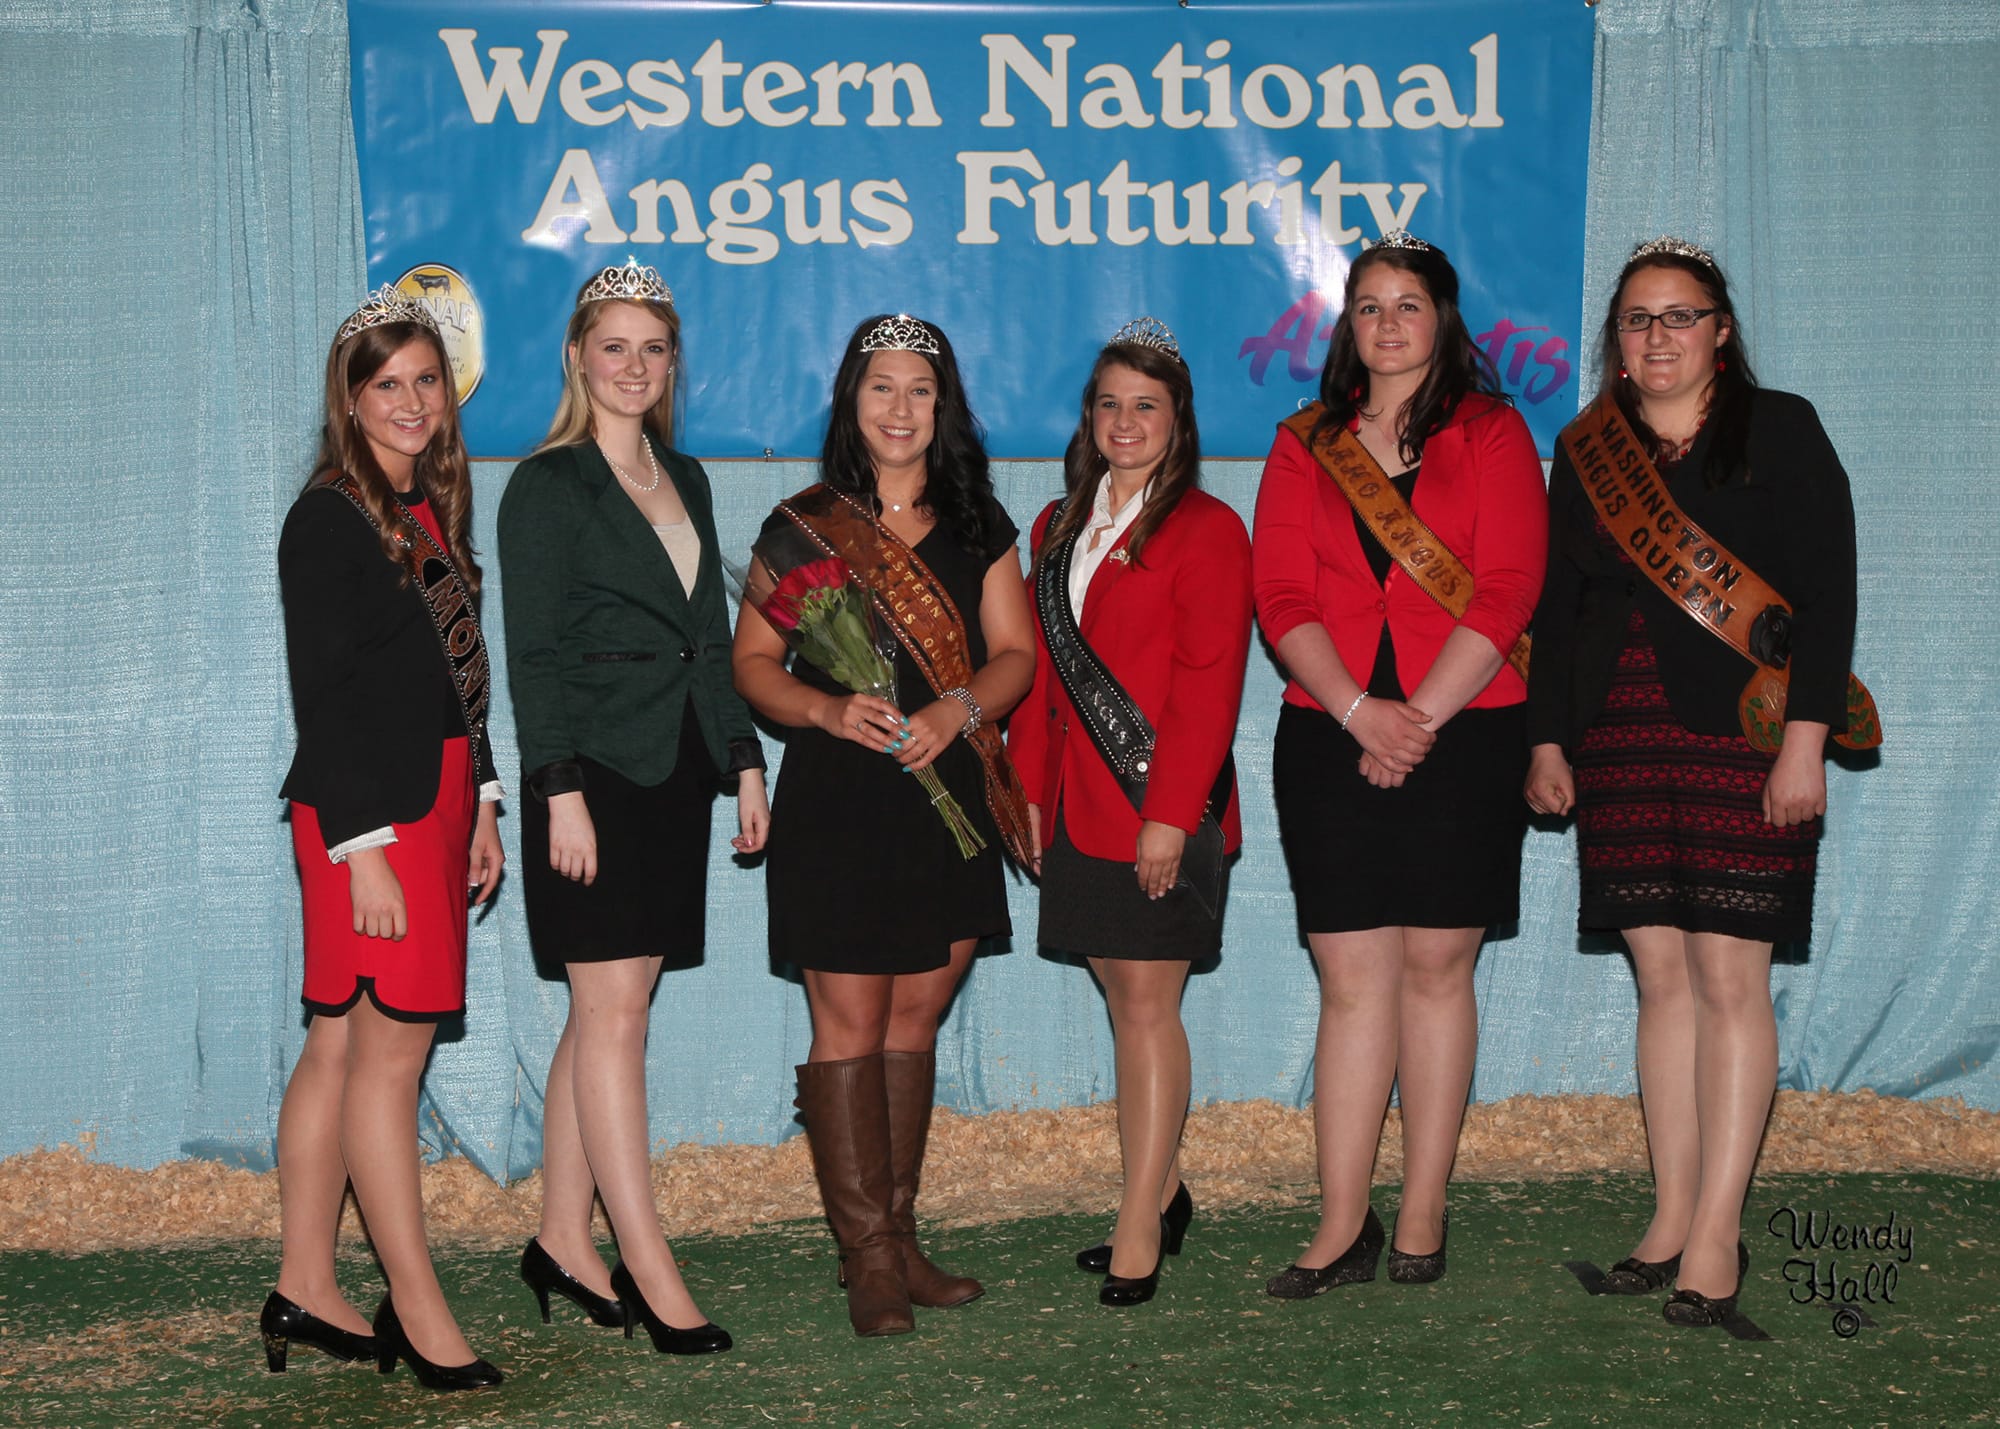 Ridgefield: Lauren Martin, Miss Western States Angus for 2014-2015, is third from left in this lineup of Angus queens.